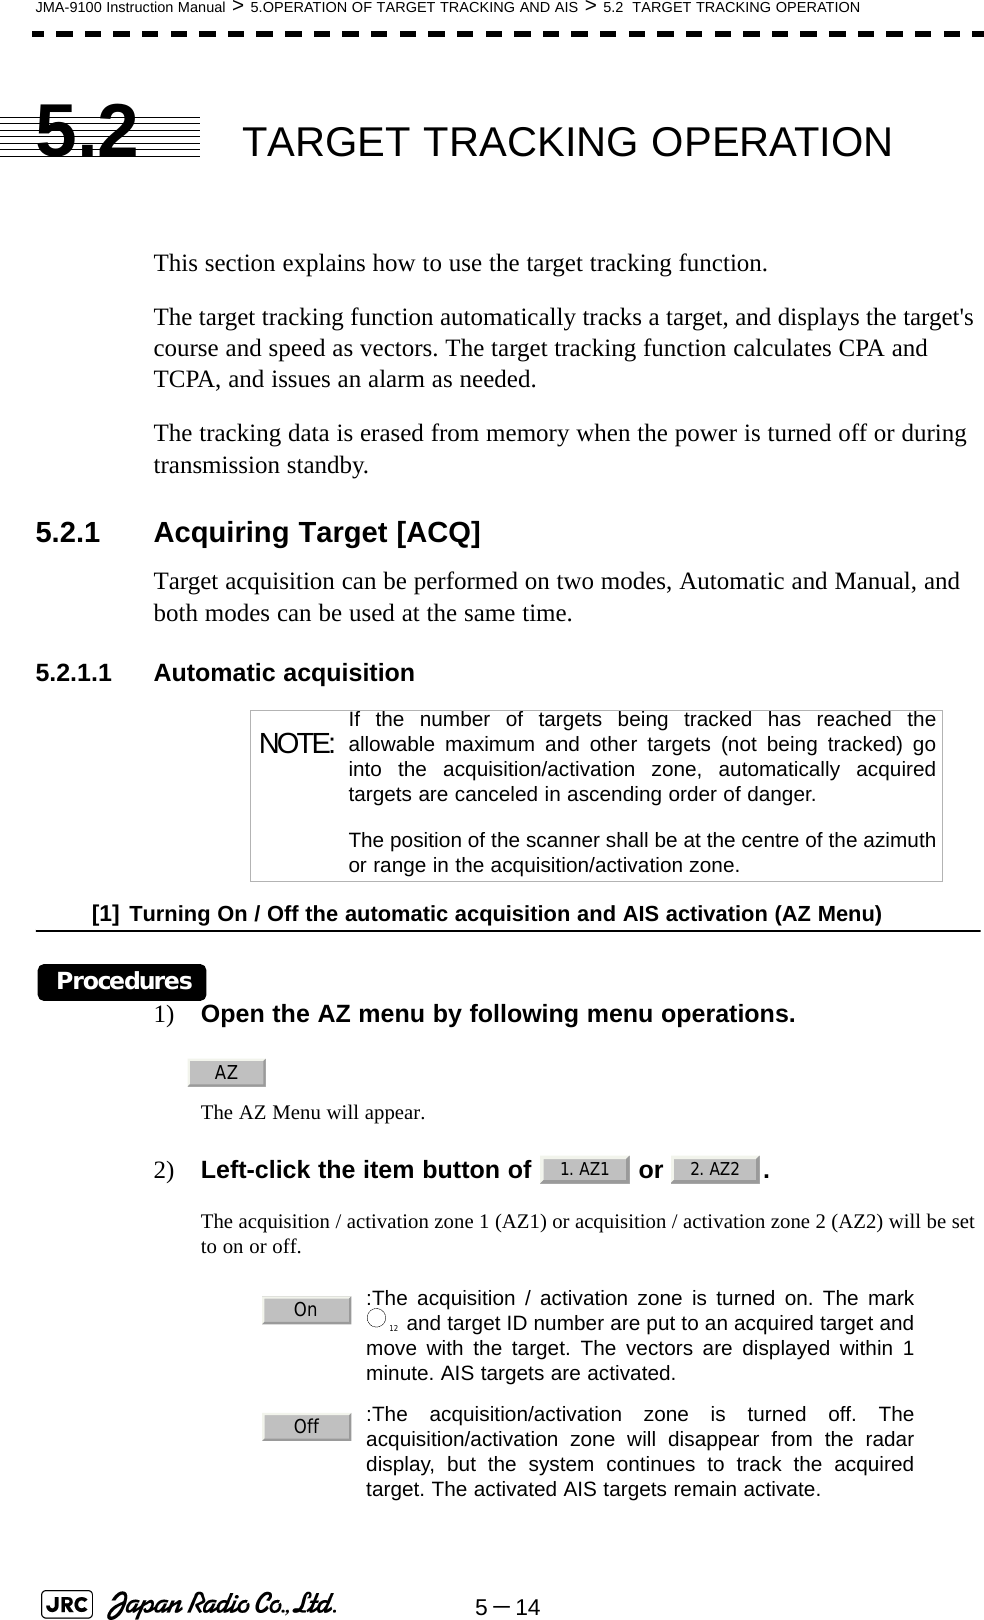 5－14JMA-9100 Instruction Manual &gt; 5.OPERATION OF TARGET TRACKING AND AIS &gt; 5.2  TARGET TRACKING OPERATION5.2 TARGET TRACKING OPERATIONThis section explains how to use the target tracking function.The target tracking function automatically tracks a target, and displays the target&apos;s course and speed as vectors. The target tracking function calculates CPA and TCPA, and issues an alarm as needed.The tracking data is erased from memory when the power is turned off or during transmission standby.5.2.1 Acquiring Target [ACQ] Target acquisition can be performed on two modes, Automatic and Manual, and both modes can be used at the same time.5.2.1.1 Automatic acquisition[1] Turning On / Off the automatic acquisition and AIS activation (AZ Menu)Procedures1) Open the AZ menu by following menu operations.The AZ Menu will appear.2) Left-click the item button of   or  . The acquisition / activation zone 1 (AZ1) or acquisition / activation zone 2 (AZ2) will be set to on or off. NOTE: If the number of targets being tracked has reached theallowable maximum and other targets (not being tracked) gointo the acquisition/activation zone, automatically acquiredtargets are canceled in ascending order of danger.The position of the scanner shall be at the centre of the azimuthor range in the acquisition/activation zone.:The acquisition / activation zone is turned on. The mark and target ID number are put to an acquired target andmove with the target. The vectors are displayed within 1minute. AIS targets are activated.:The acquisition/activation zone is turned off. Theacquisition/activation zone will disappear from the radardisplay, but the system continues to track the acquiredtarget. The activated AIS targets remain activate.AZ1. AZ1 2. AZ2On12Off